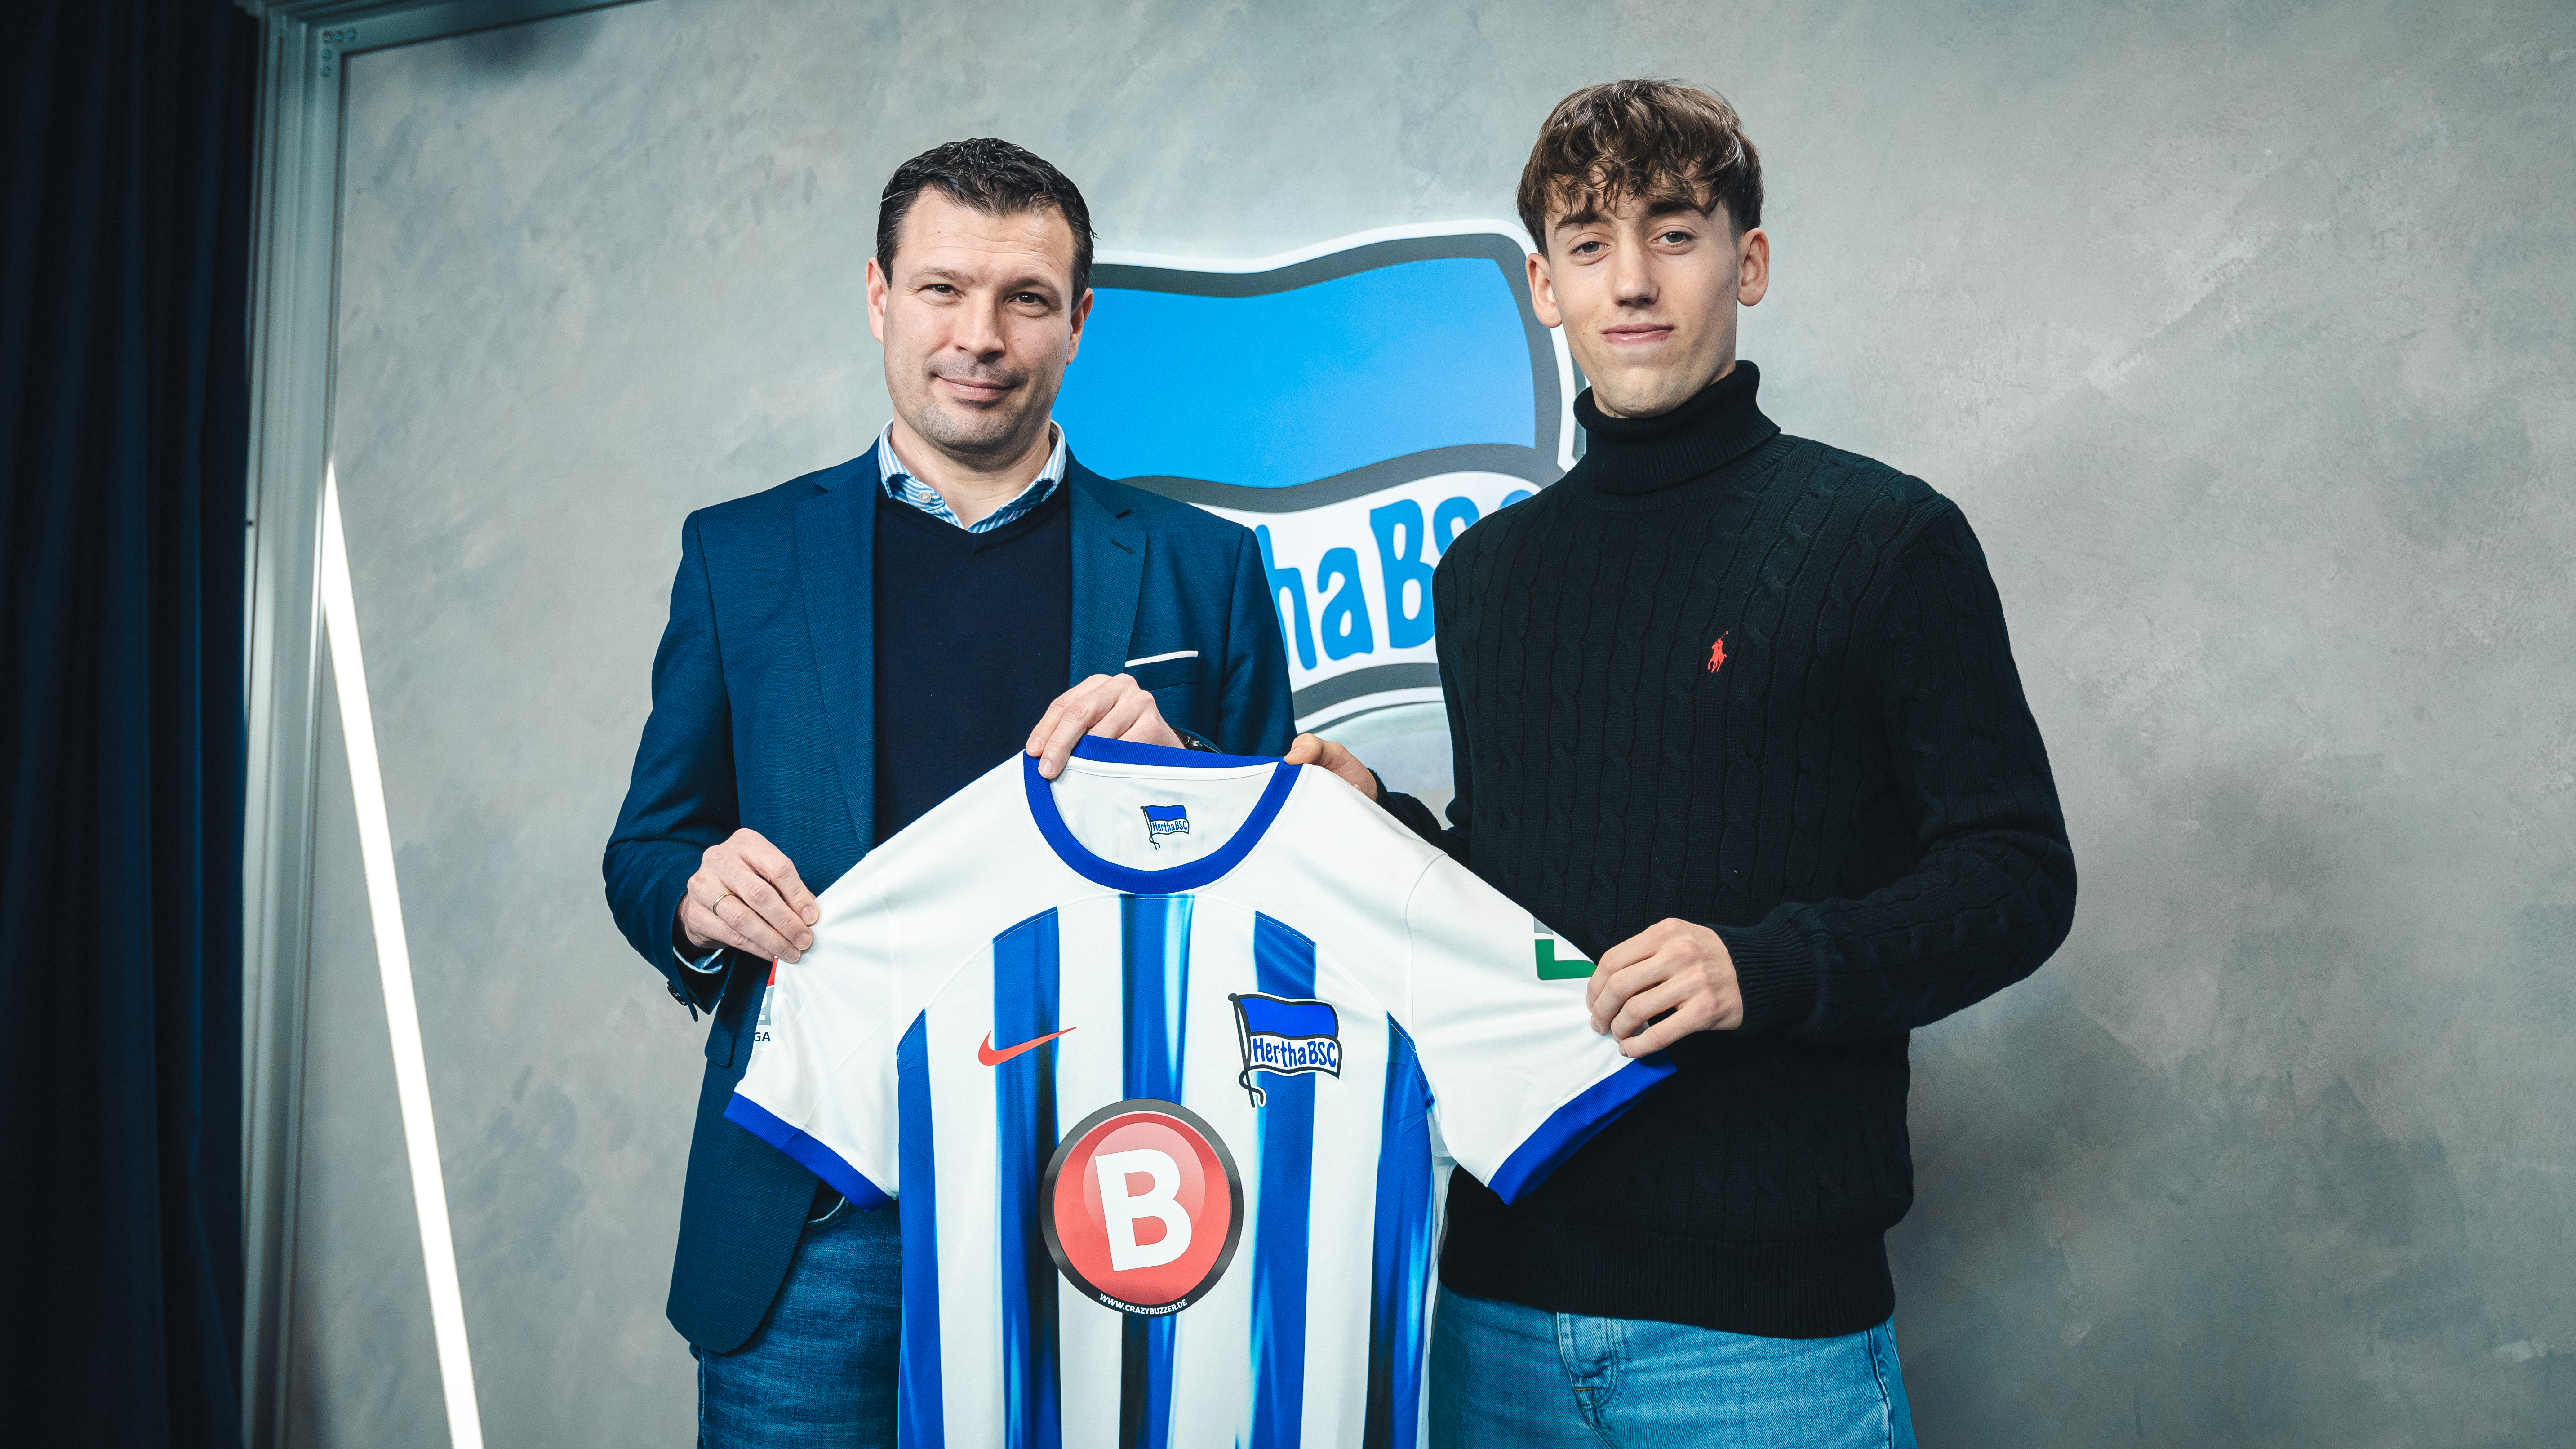 Tim Hoffmann and sporting director Benjamin Weber hold a Hertha shirt aloft in front of the camera.